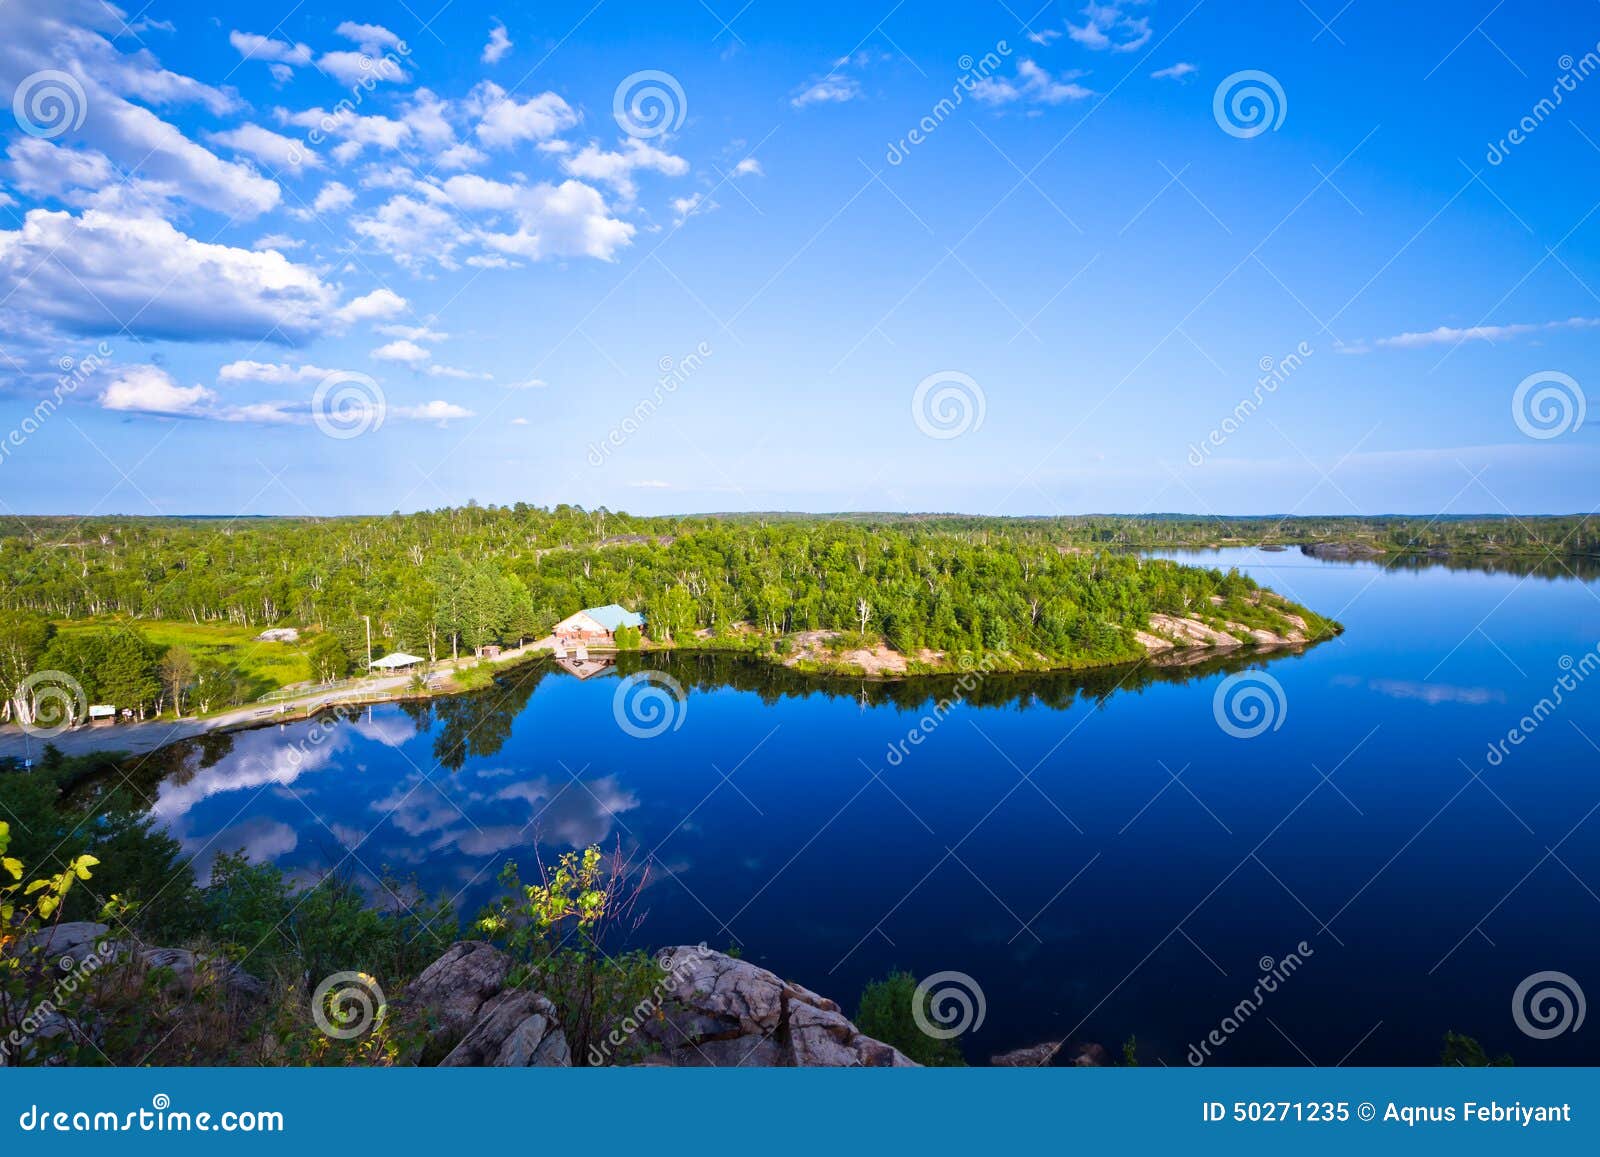 Reservation Area in Canada stock image. Image of reservation - 50271235